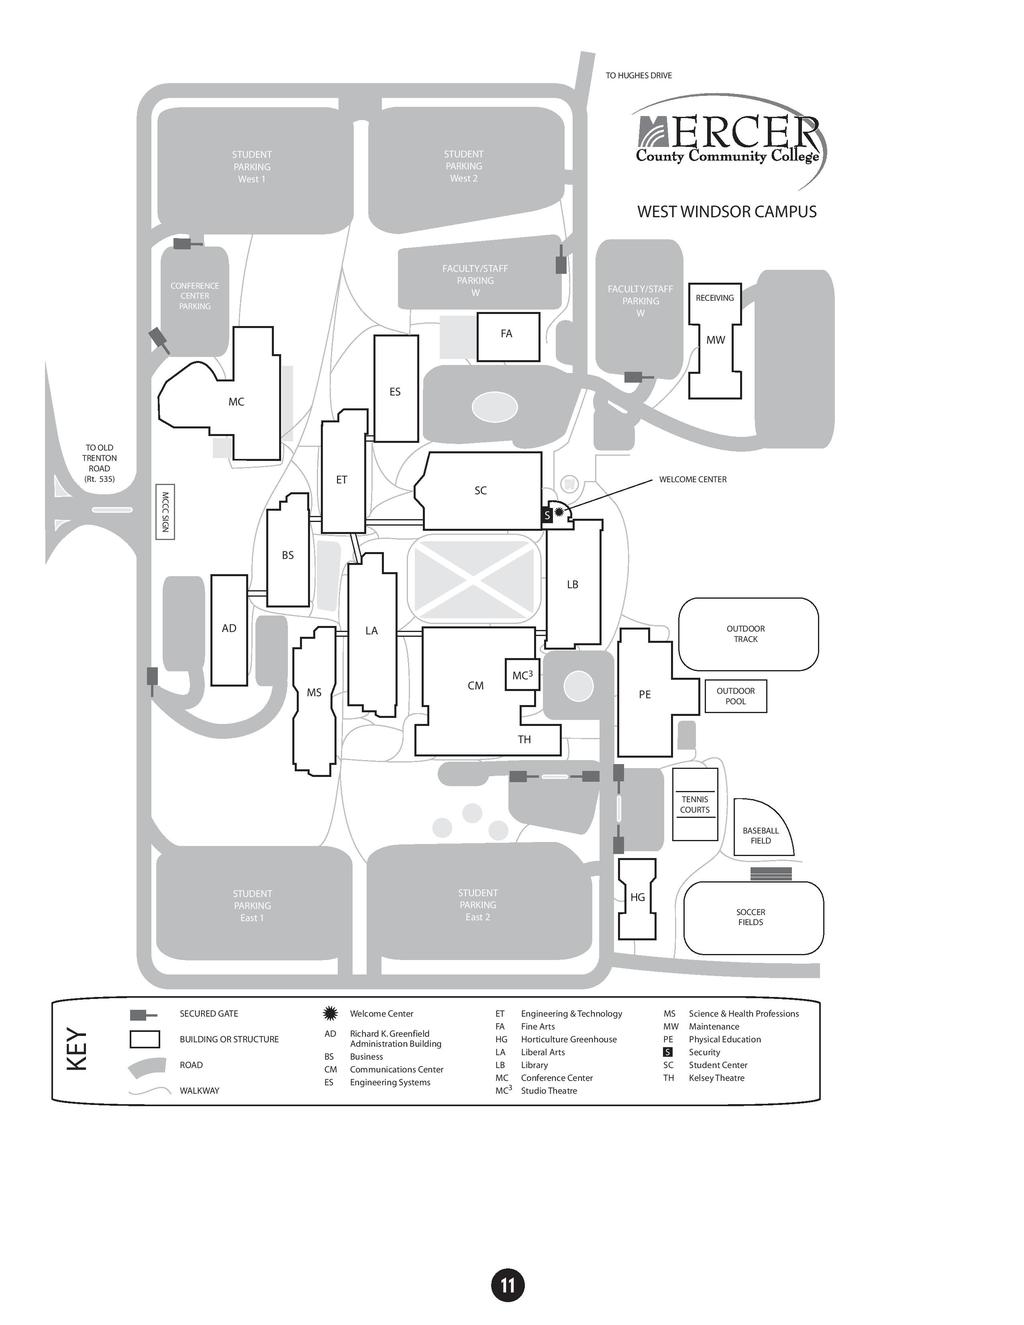 MCCC Campus Map Directions to MCCC can be found at